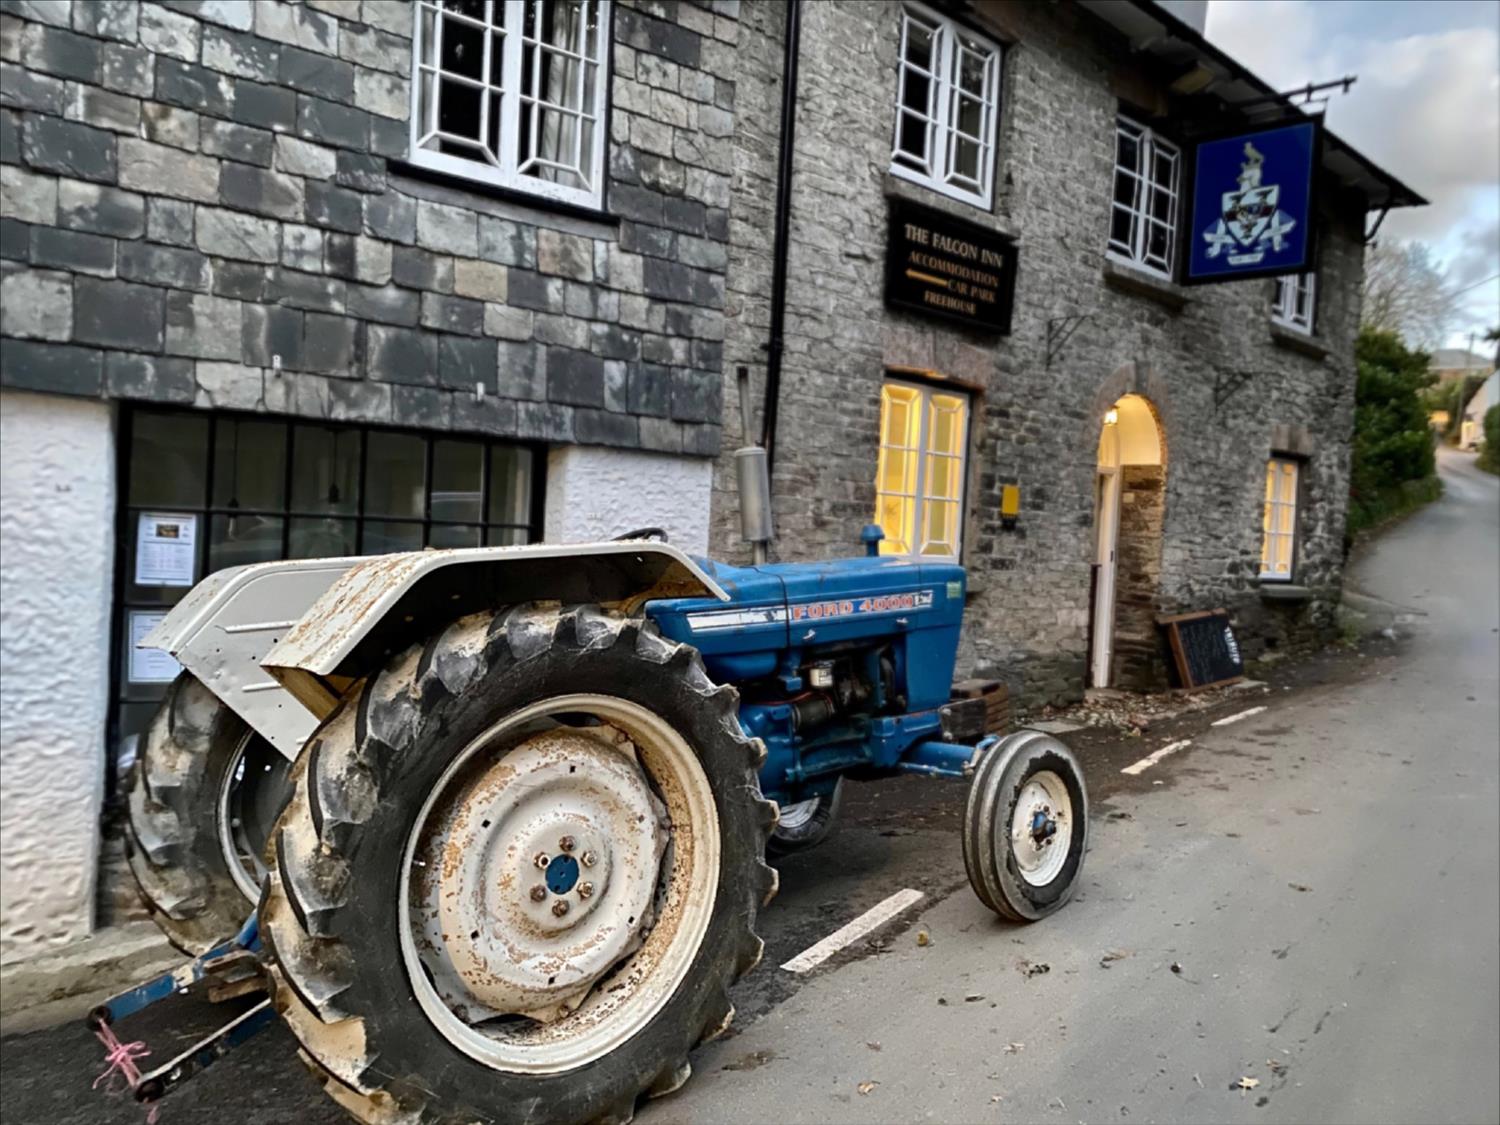 A tractor parked outside The Falcon Inn, St Mawgan, North Cornwall